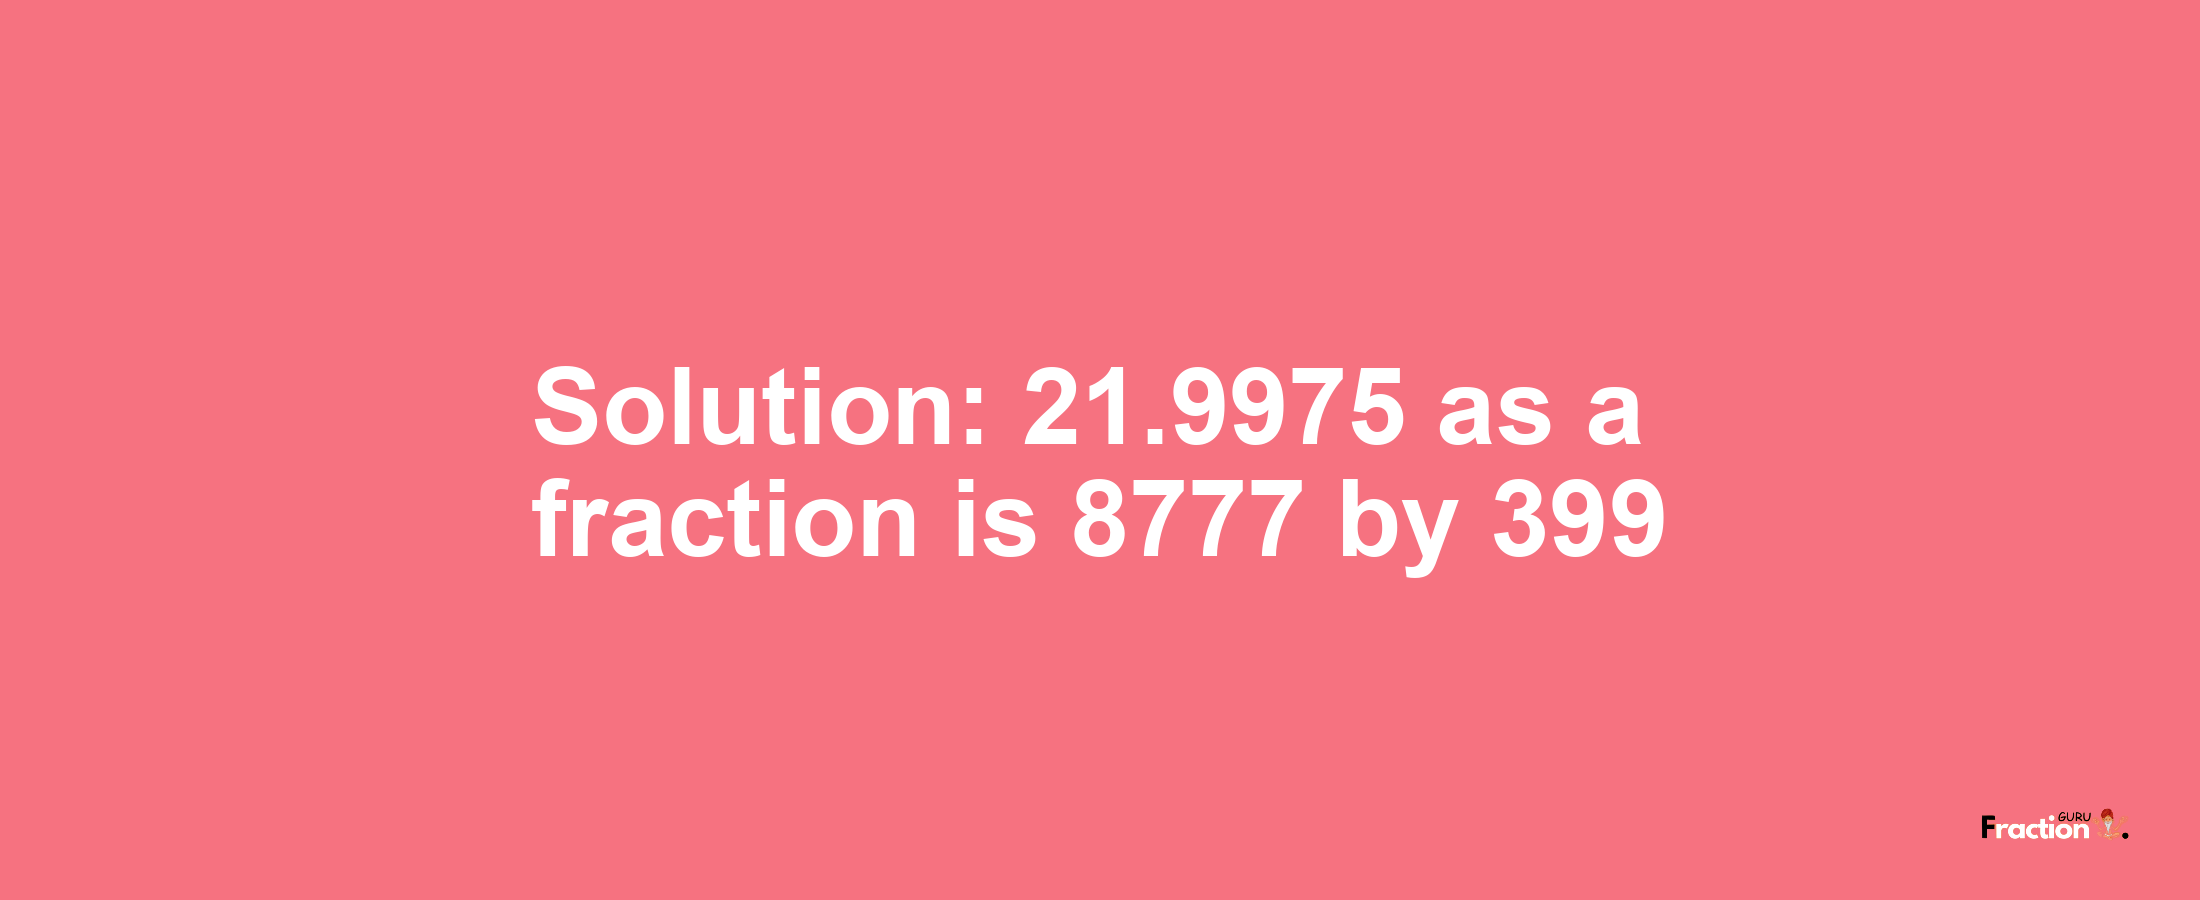 Solution:21.9975 as a fraction is 8777/399